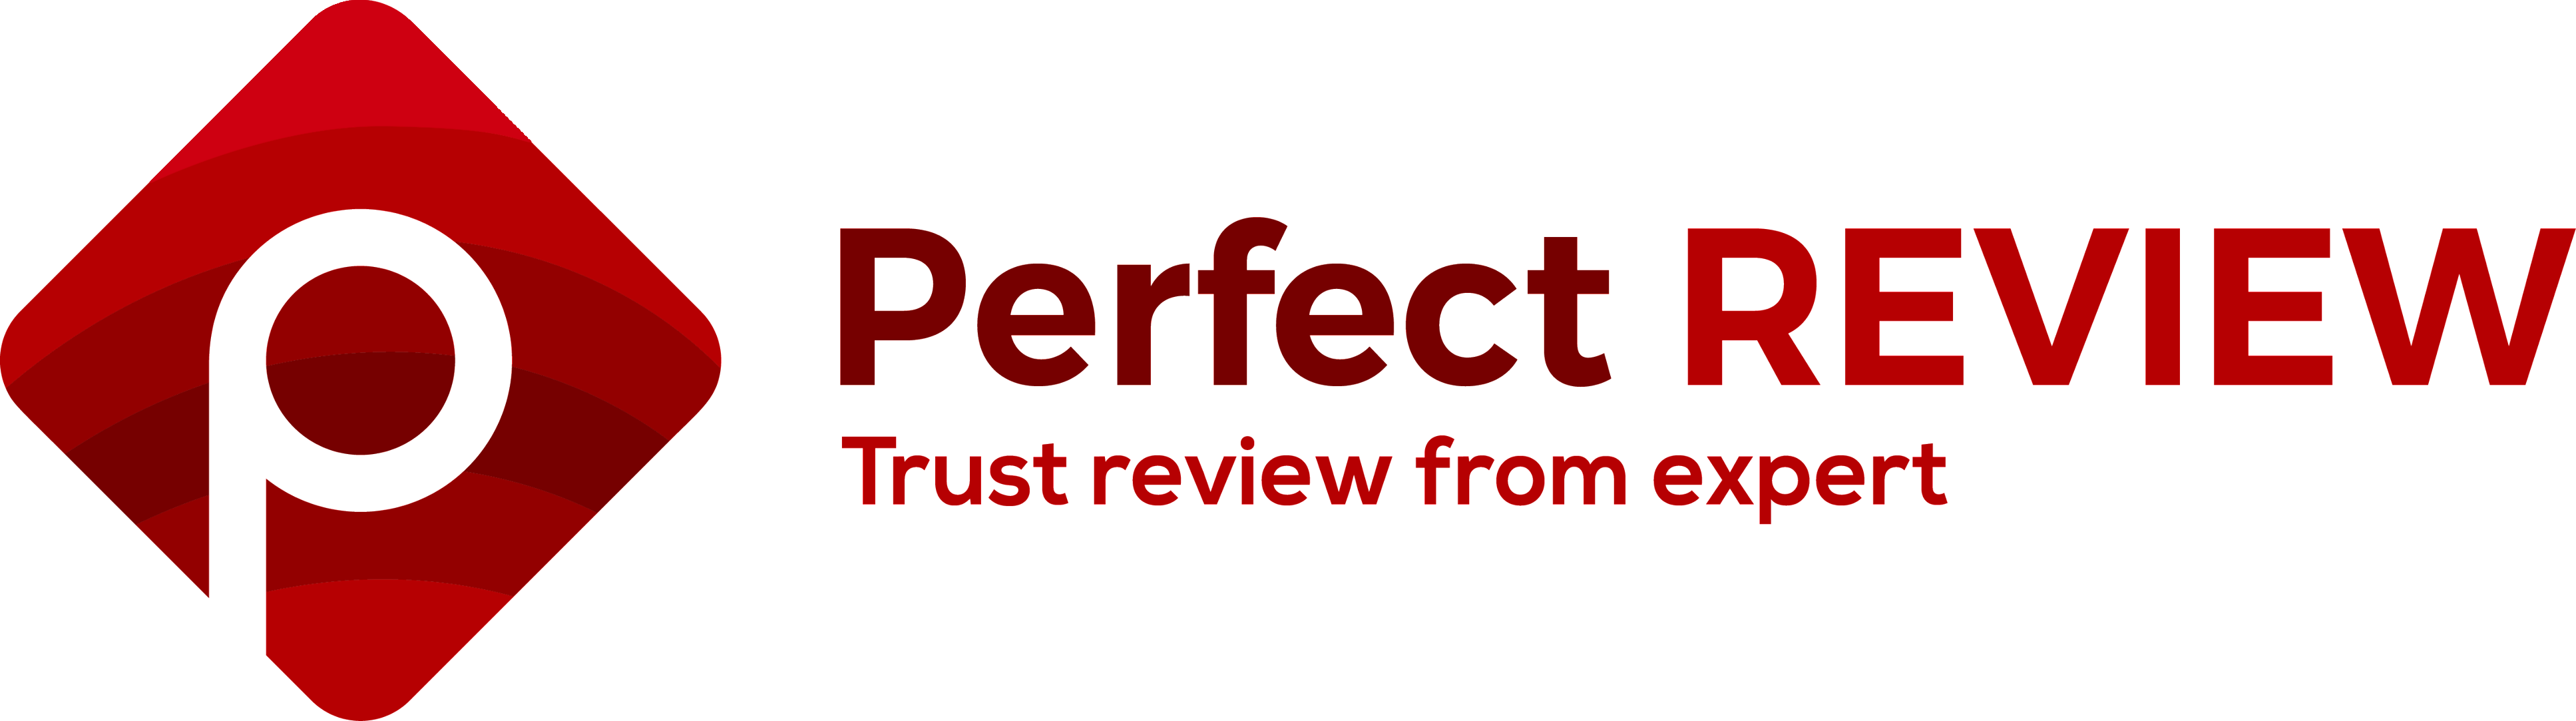 Perfect Review